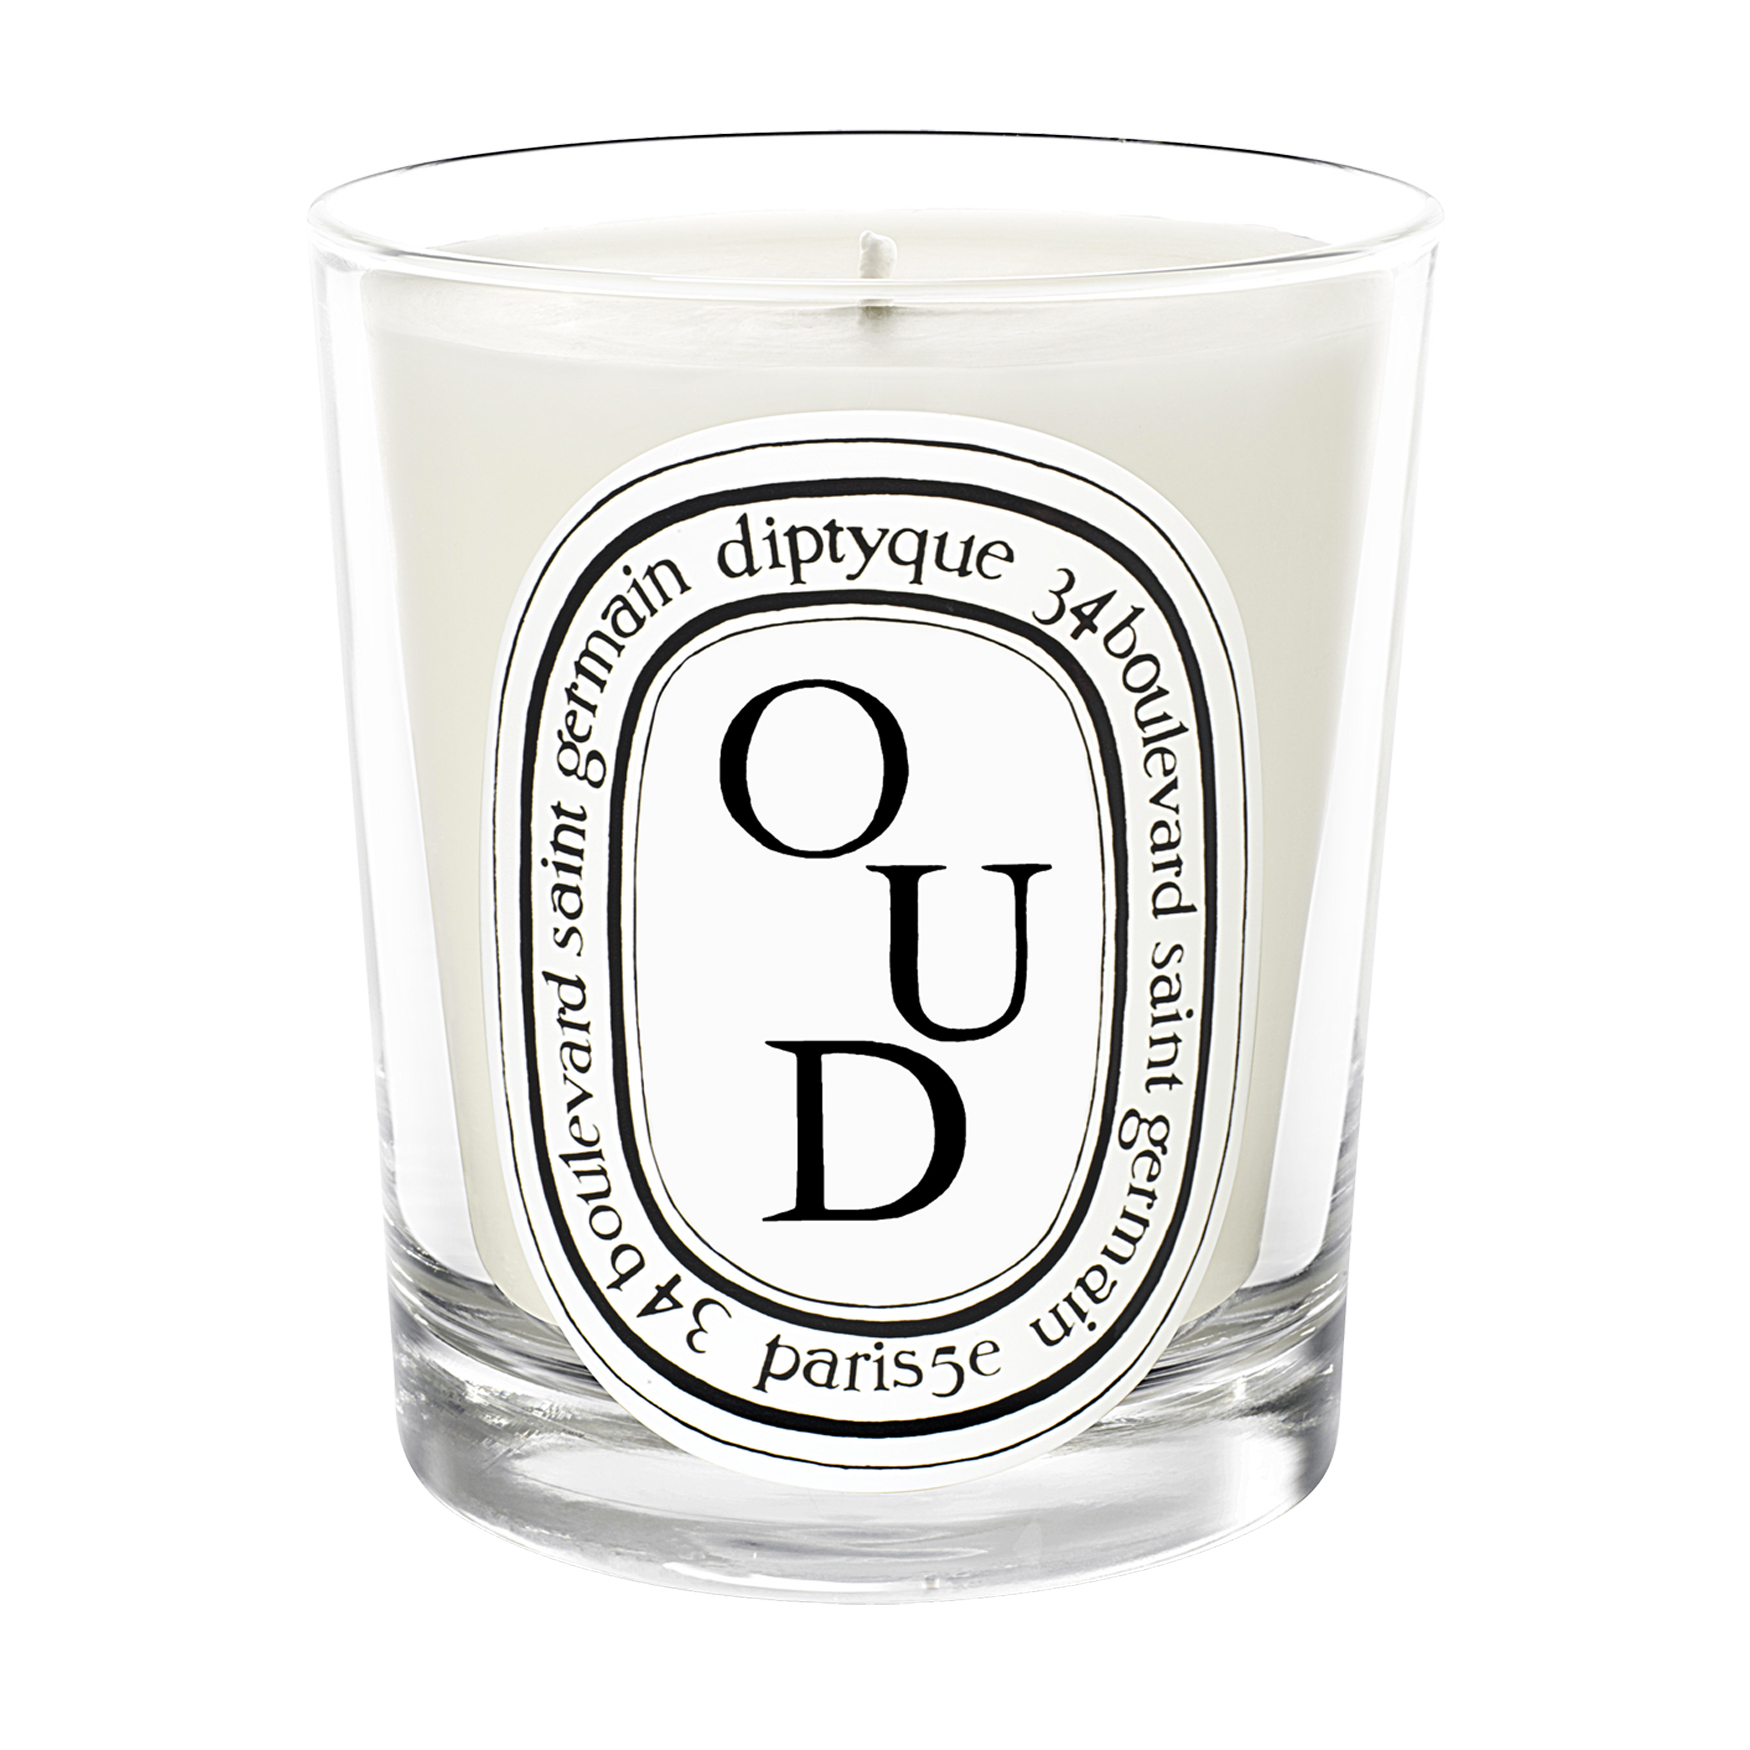 Diptyque Oud Scented Candle | Space NK